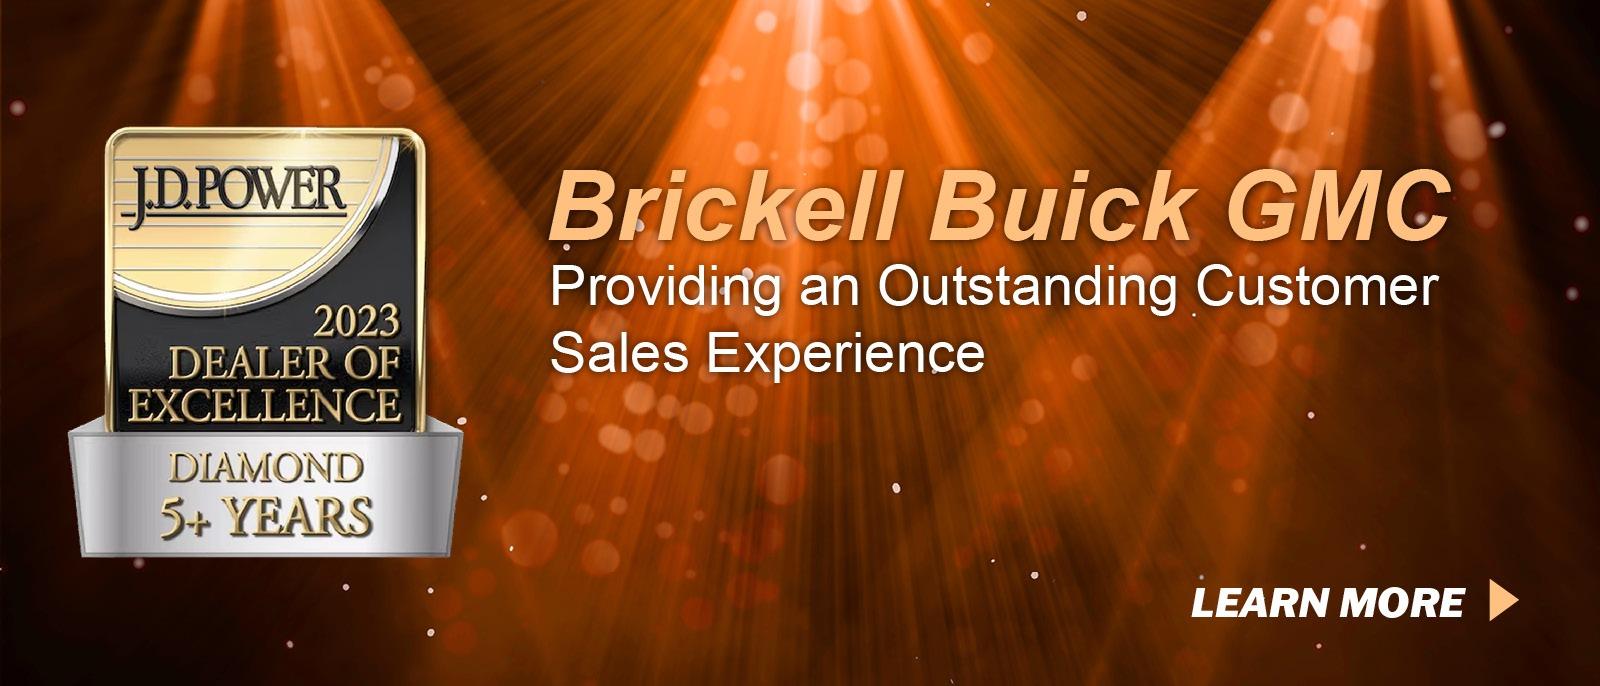 Brickell Buick GMC Reveived the Award for Dealer of Excellence by J.D. Power for 2023